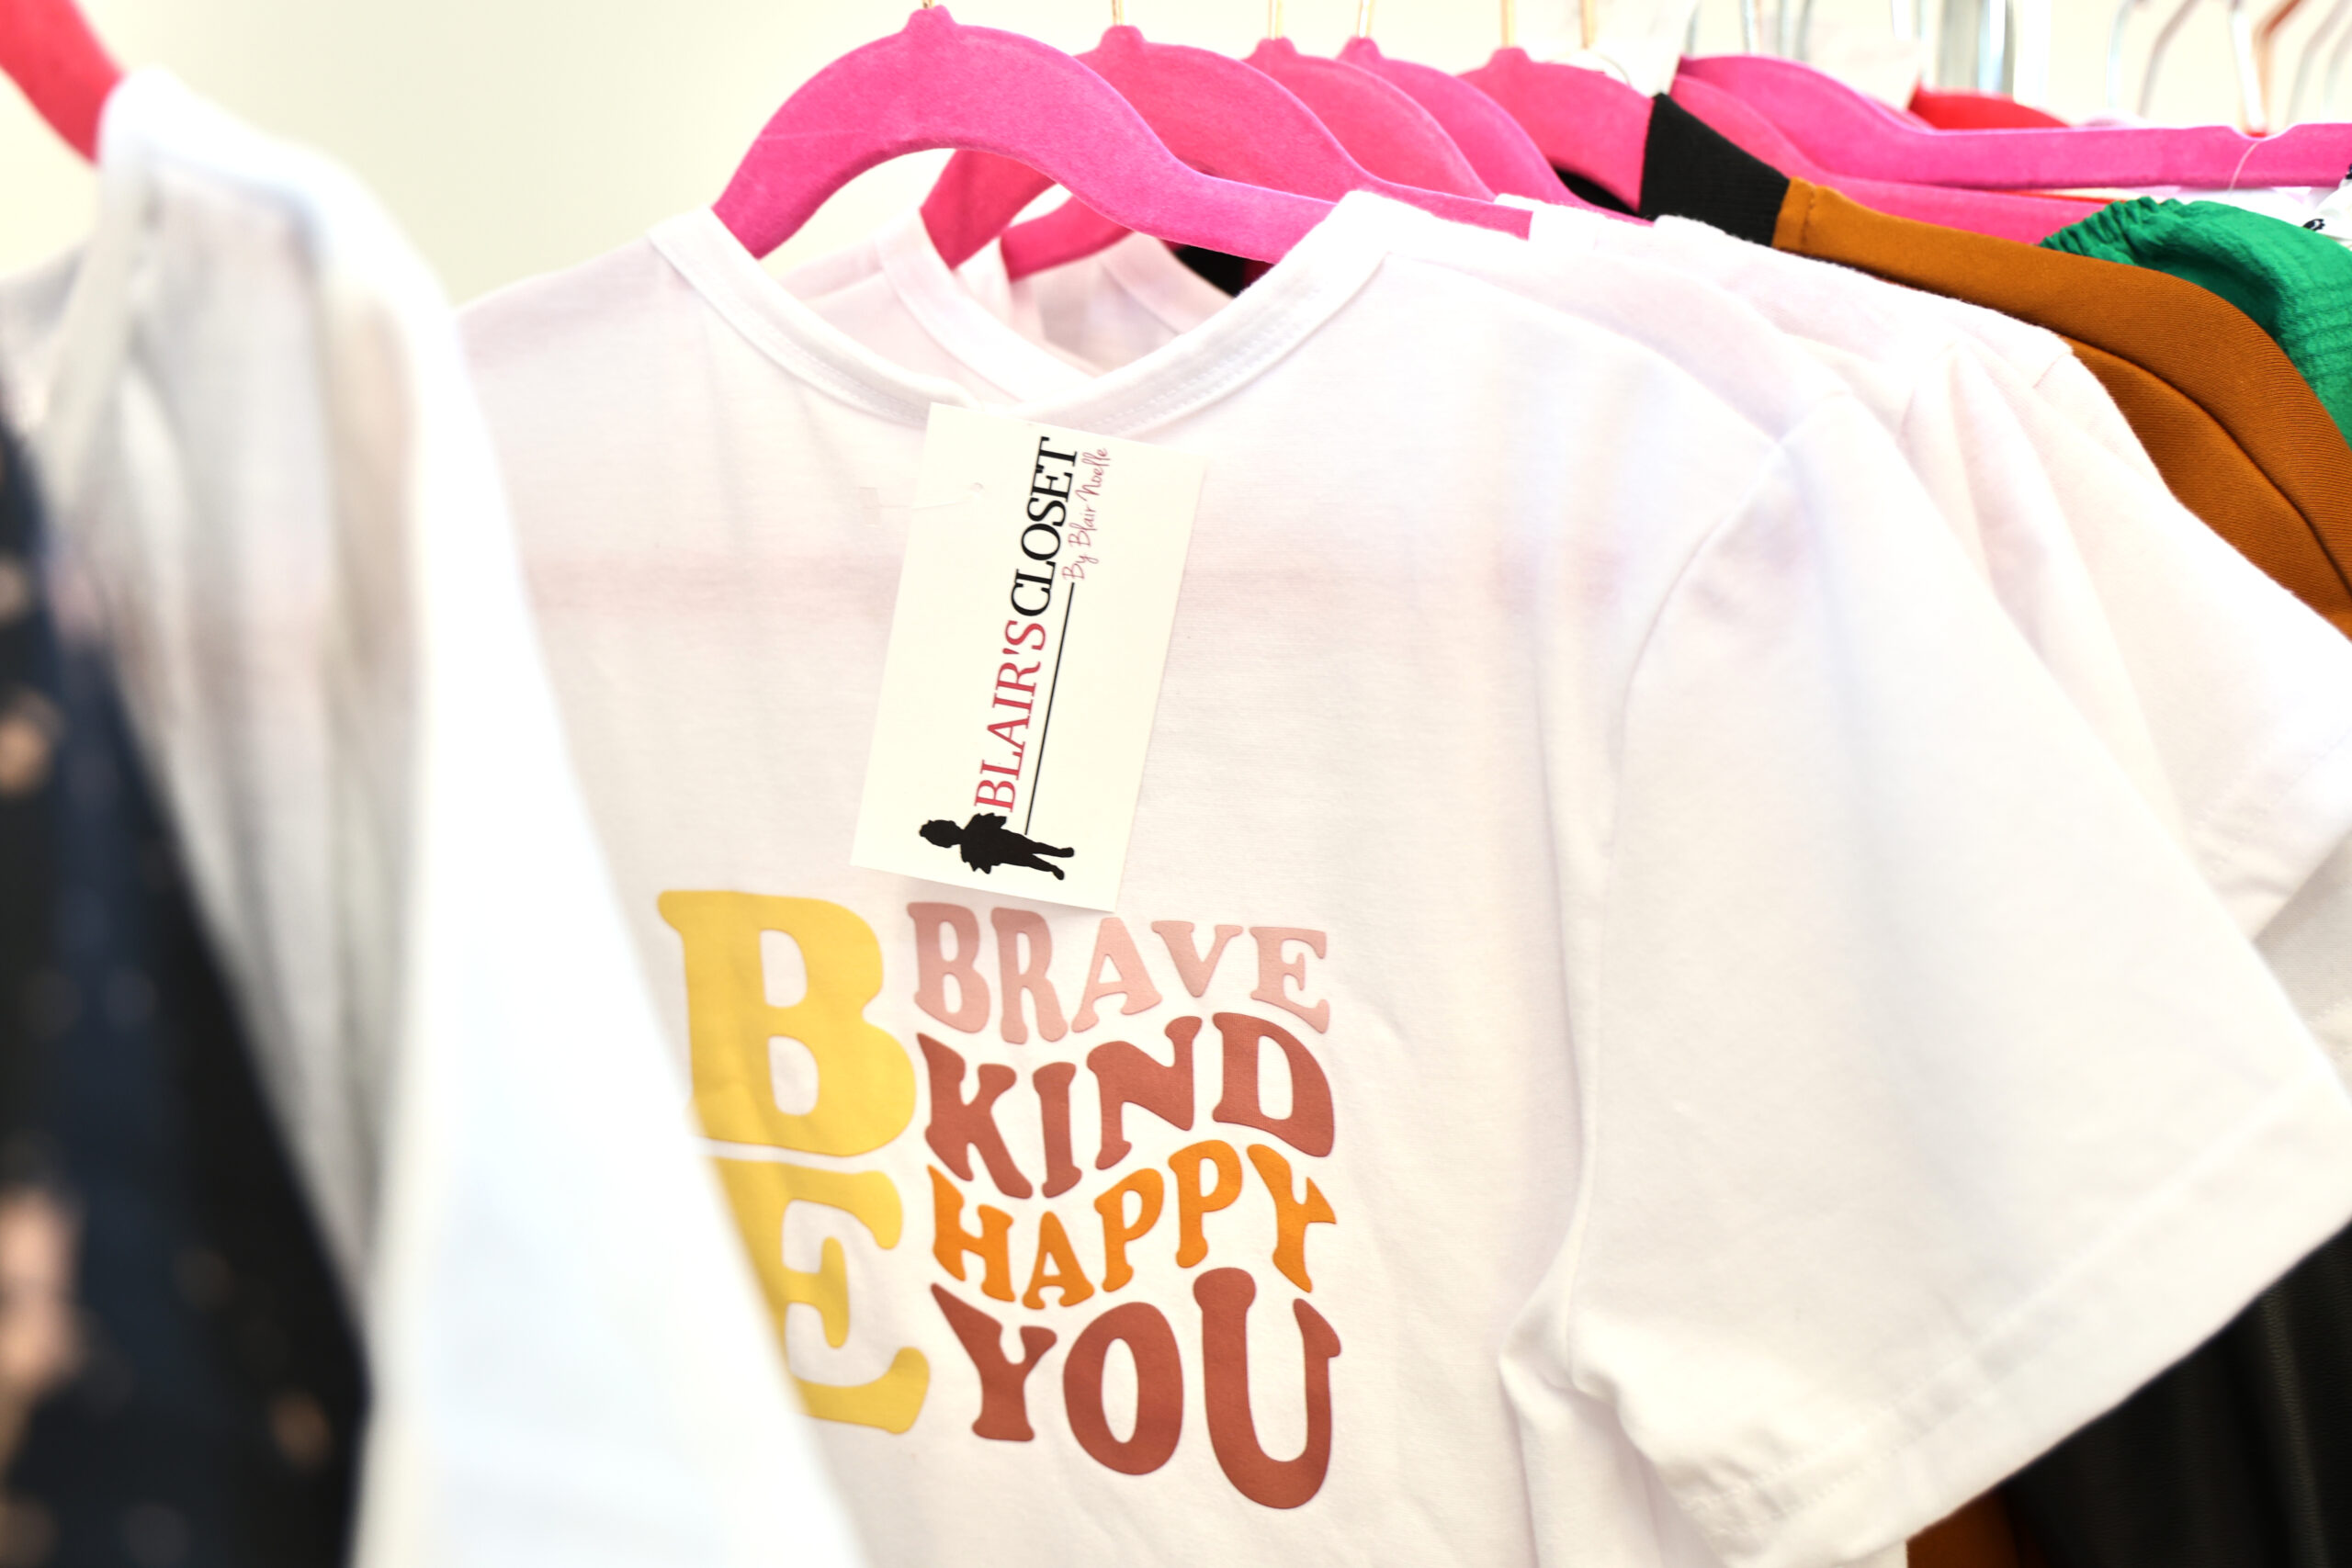 A shirt from I Am Blair's Closet that says, "Be Brave, Kind, Happy, You."